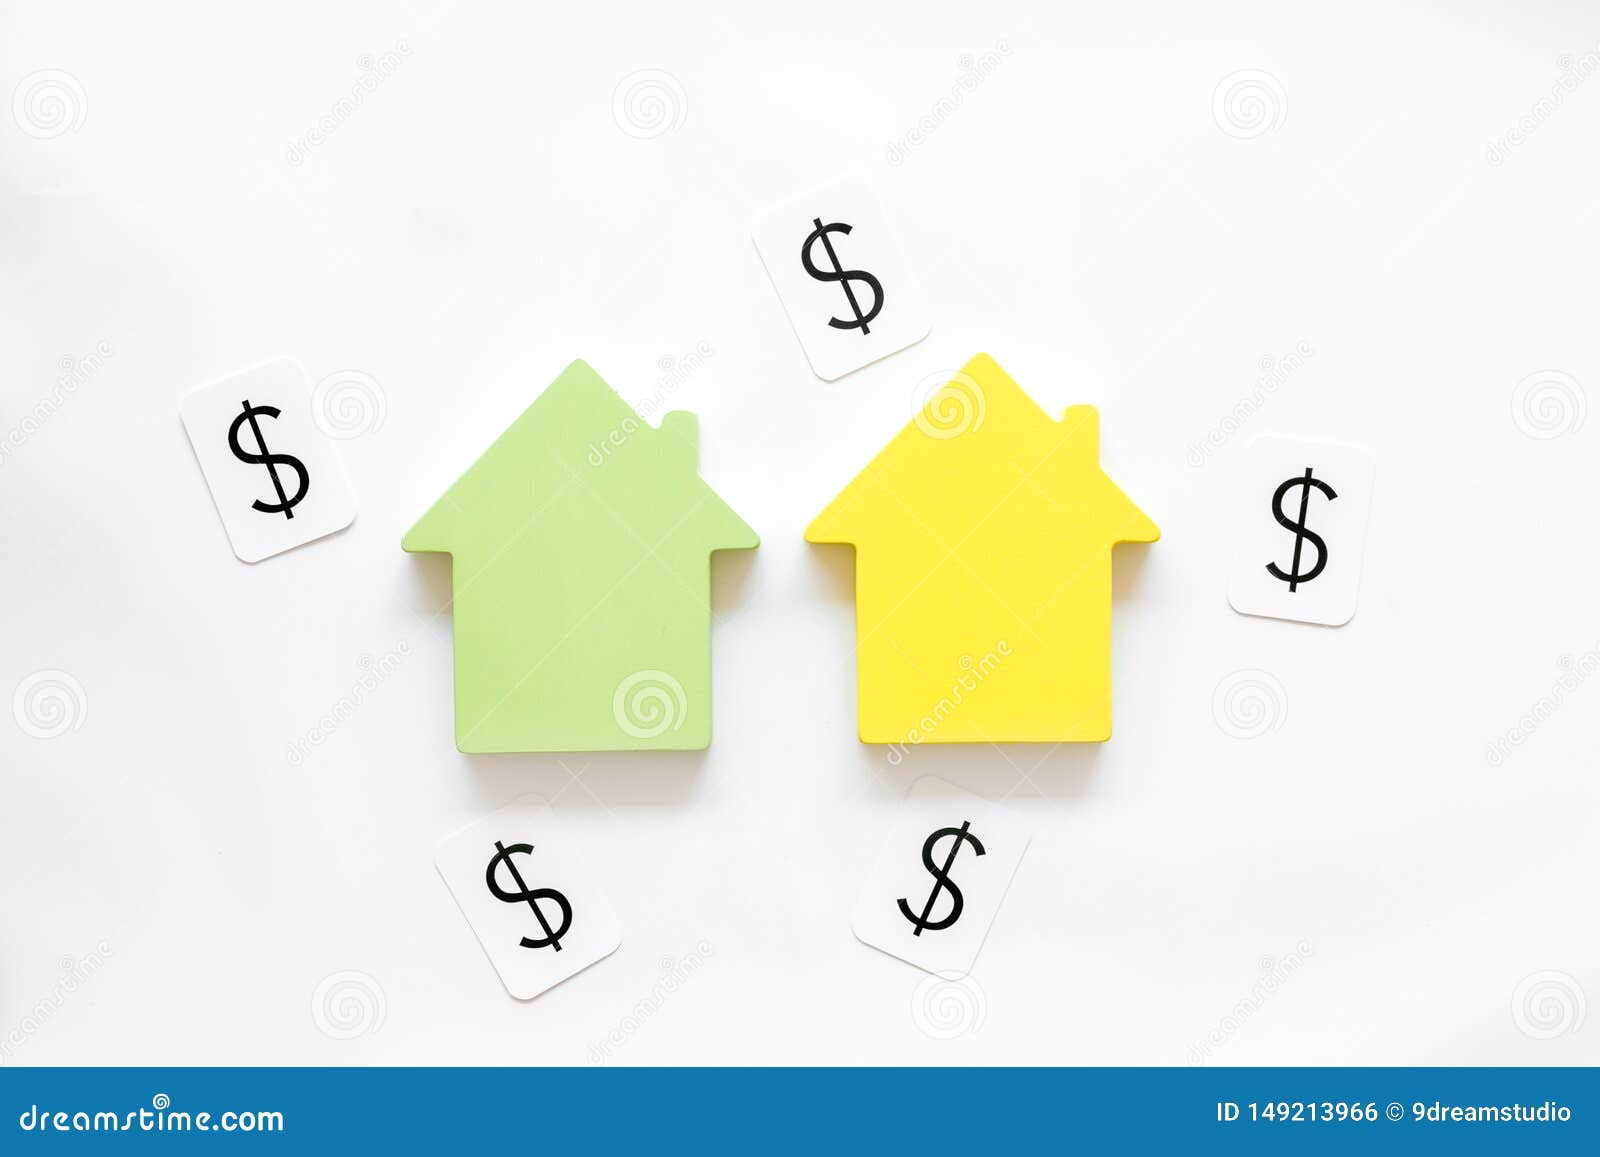 Buy House With House Figure And Dollar Signs On Office Desk White